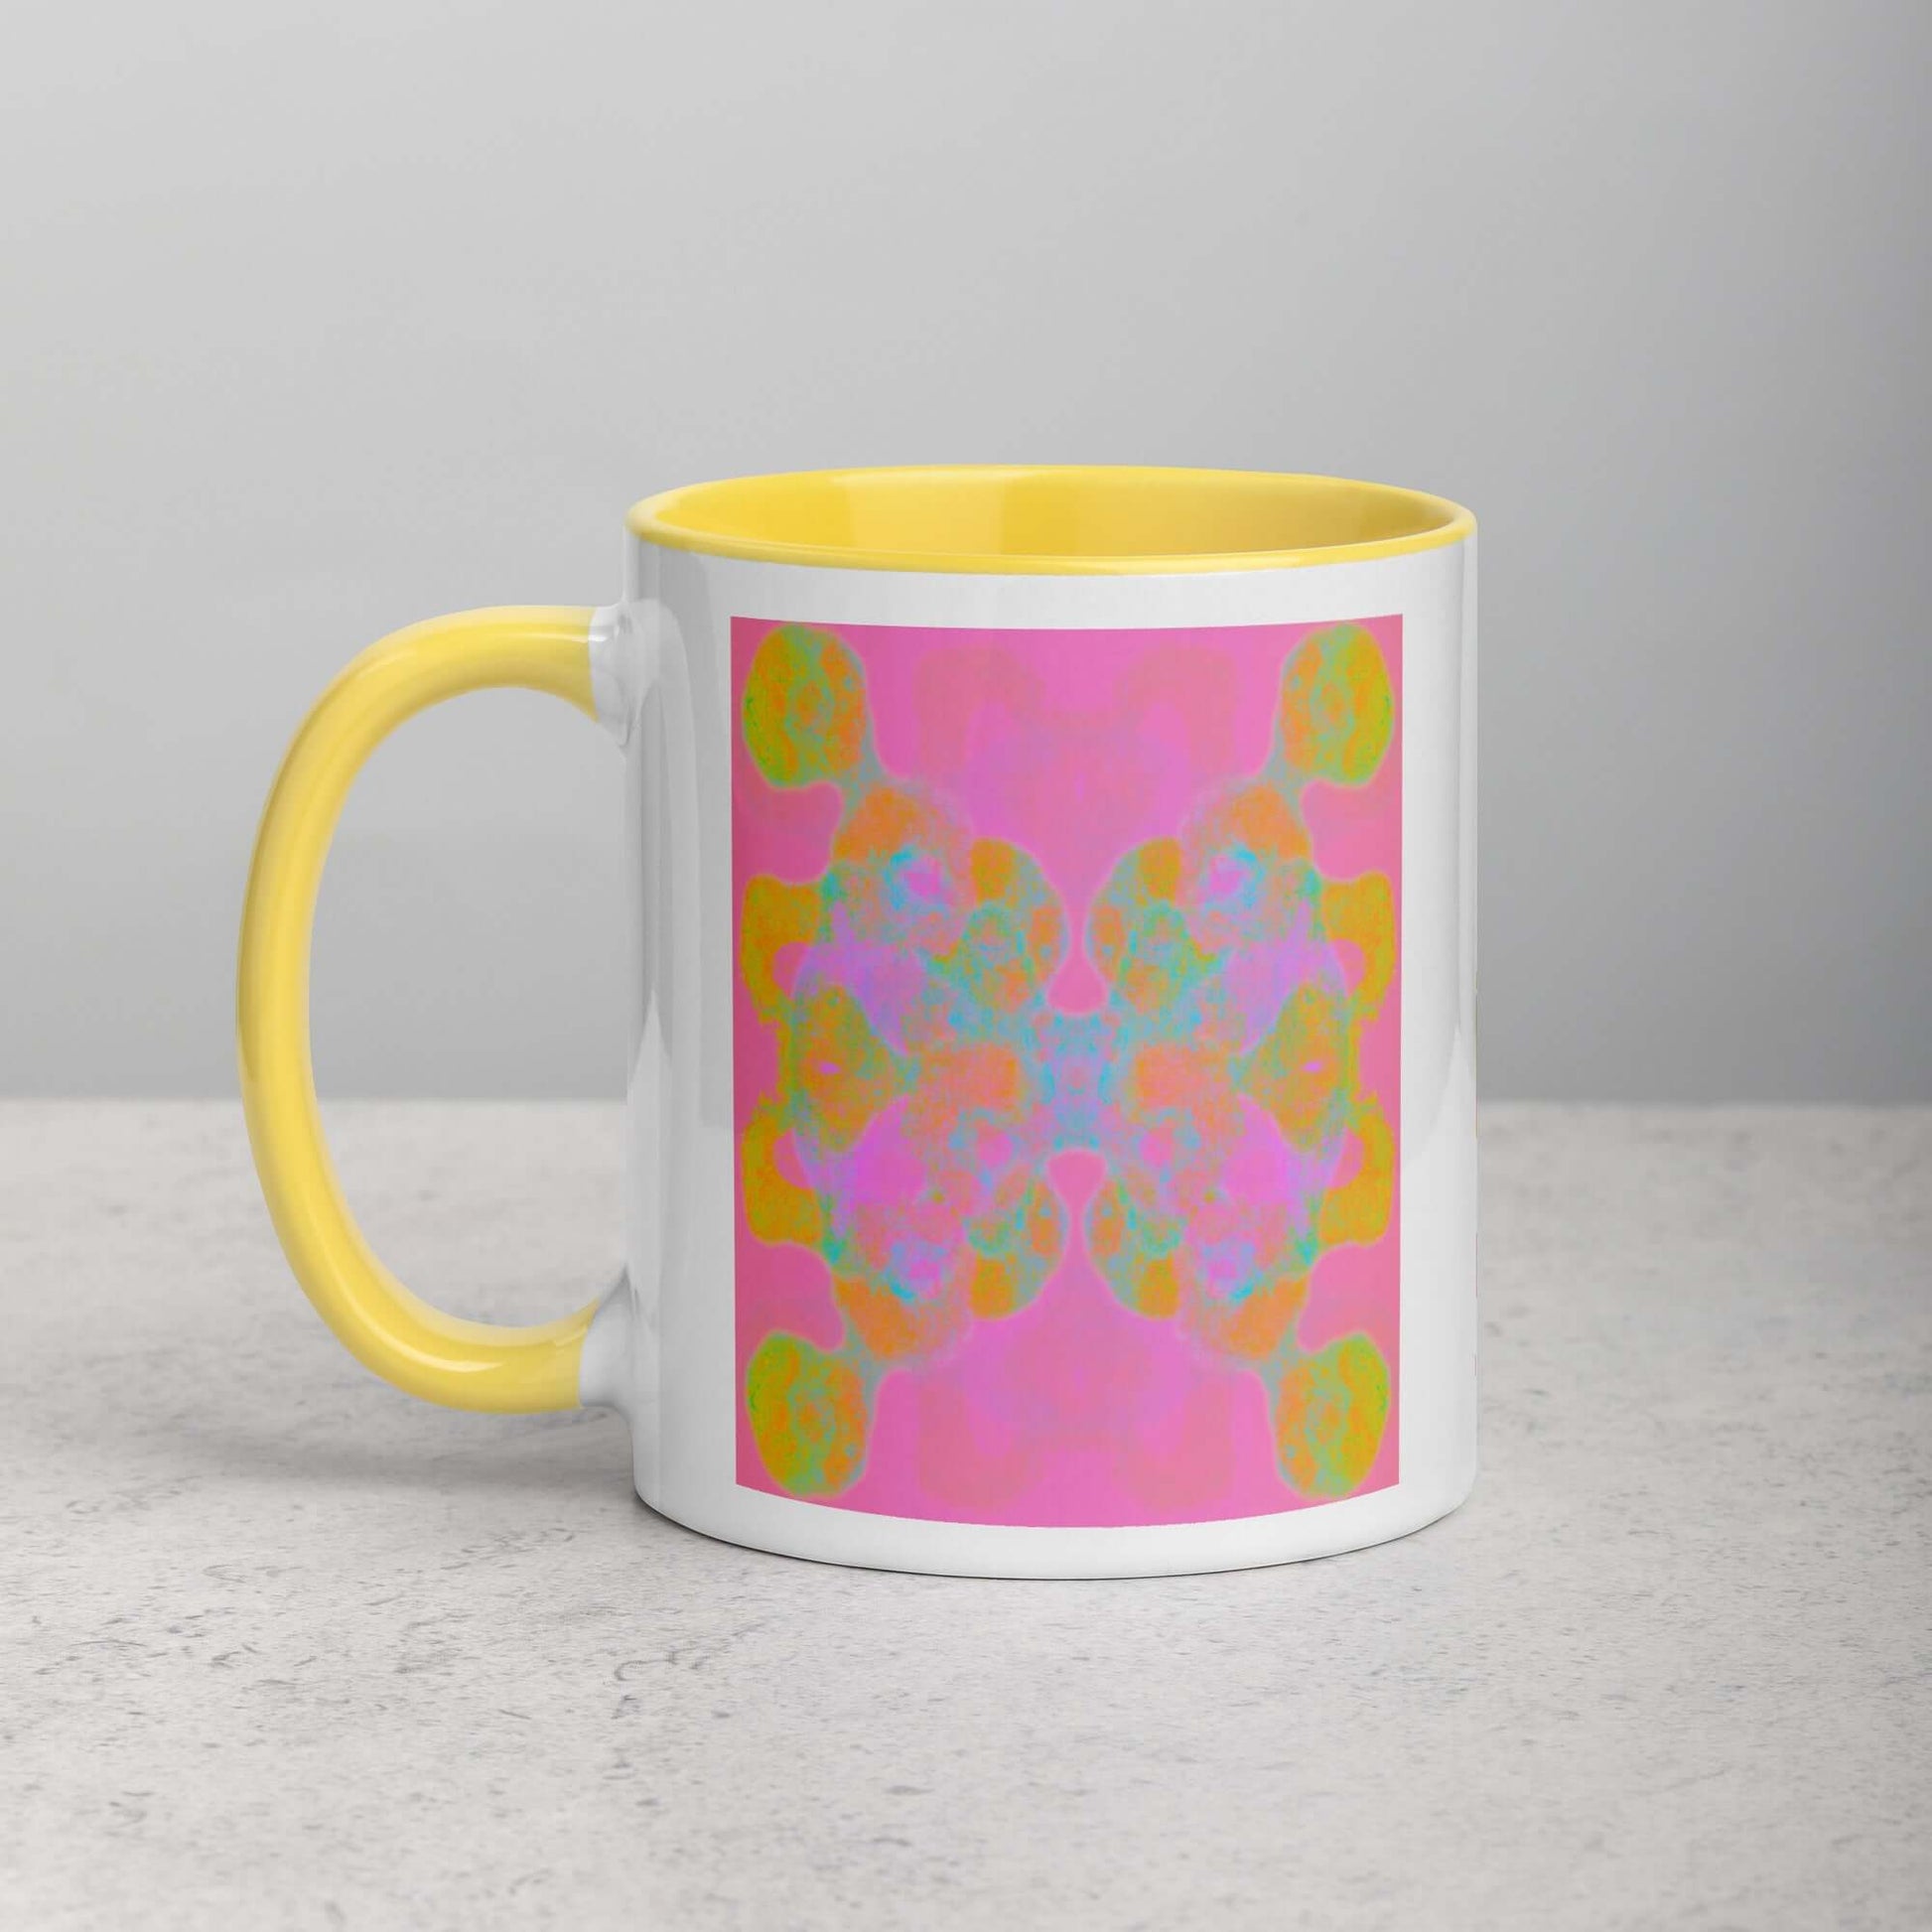 Colorful Abstract Butterfly Shape on Pink Background “Double the Fun” Abstract Art Mug with Bright Yellow Color Inside Left Handed Front View